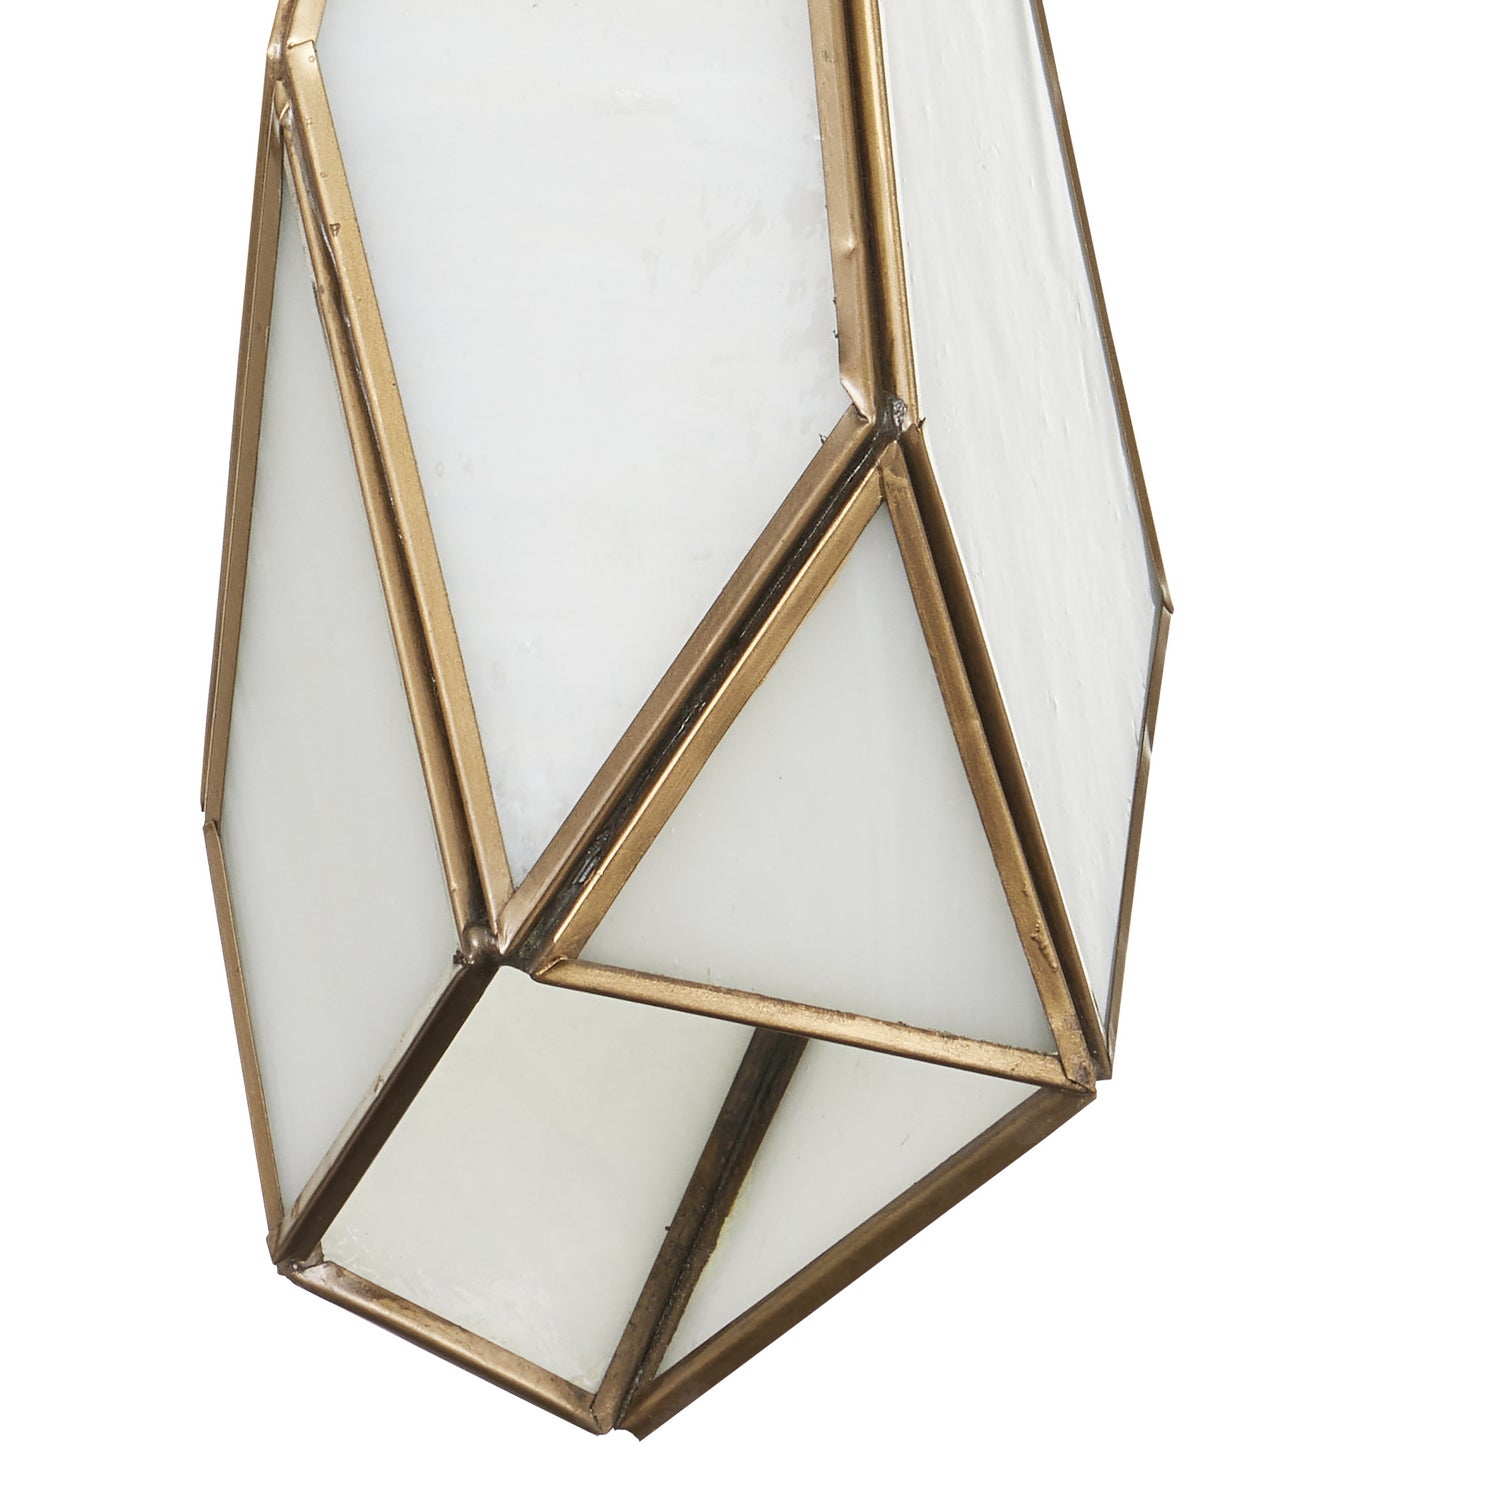 15 Light Pendant from the Glace collection in White/Antique Brass/Silver finish